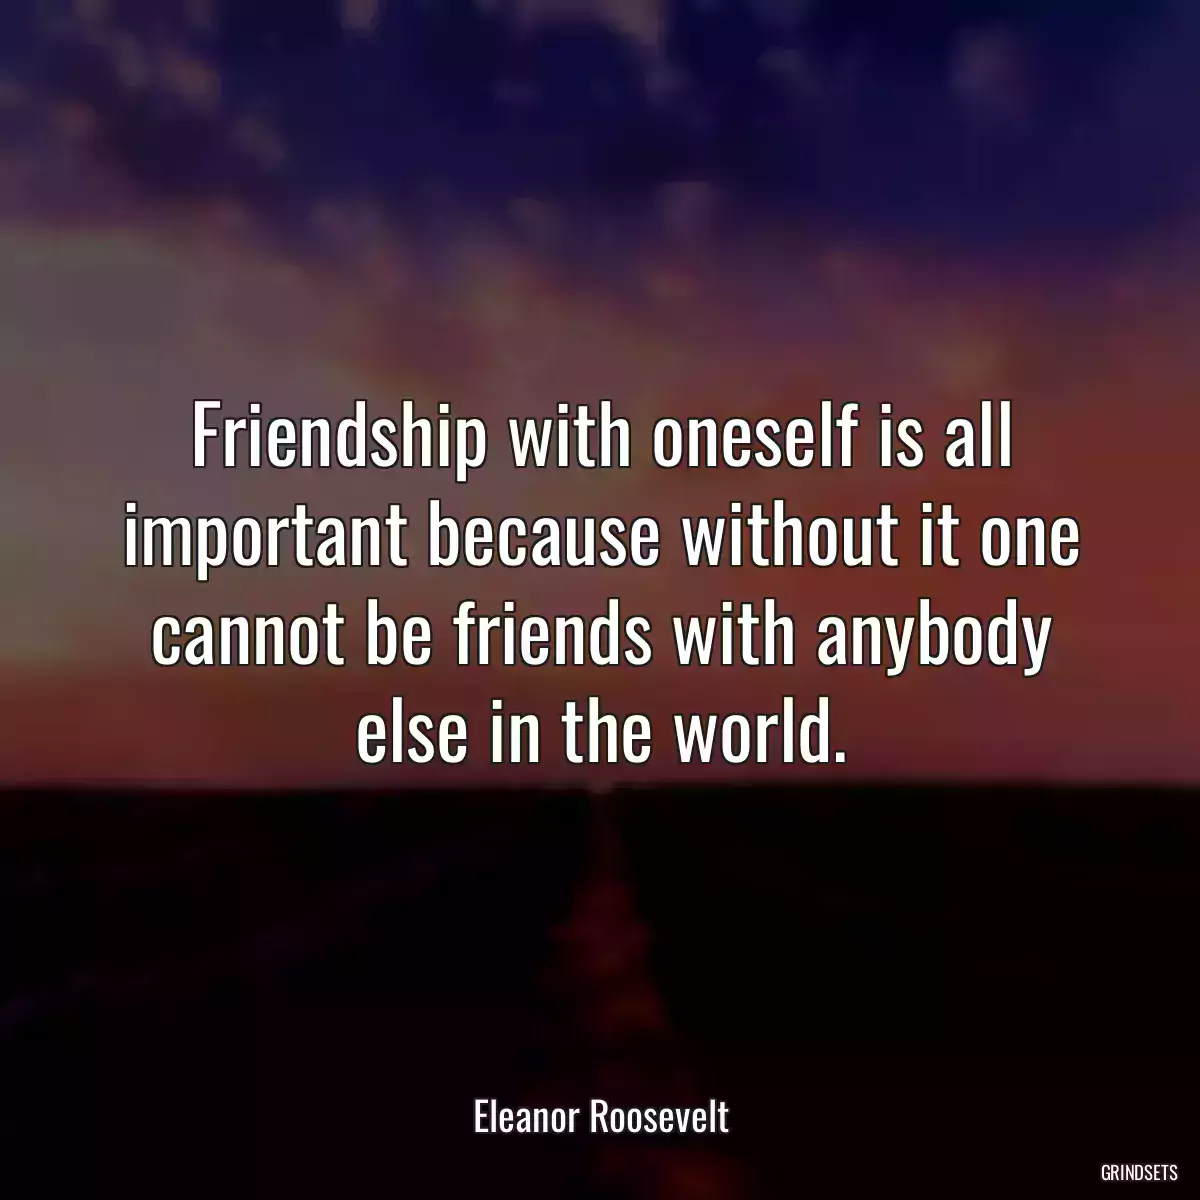 Friendship with oneself is all important because without it one cannot be friends with anybody else in the world.